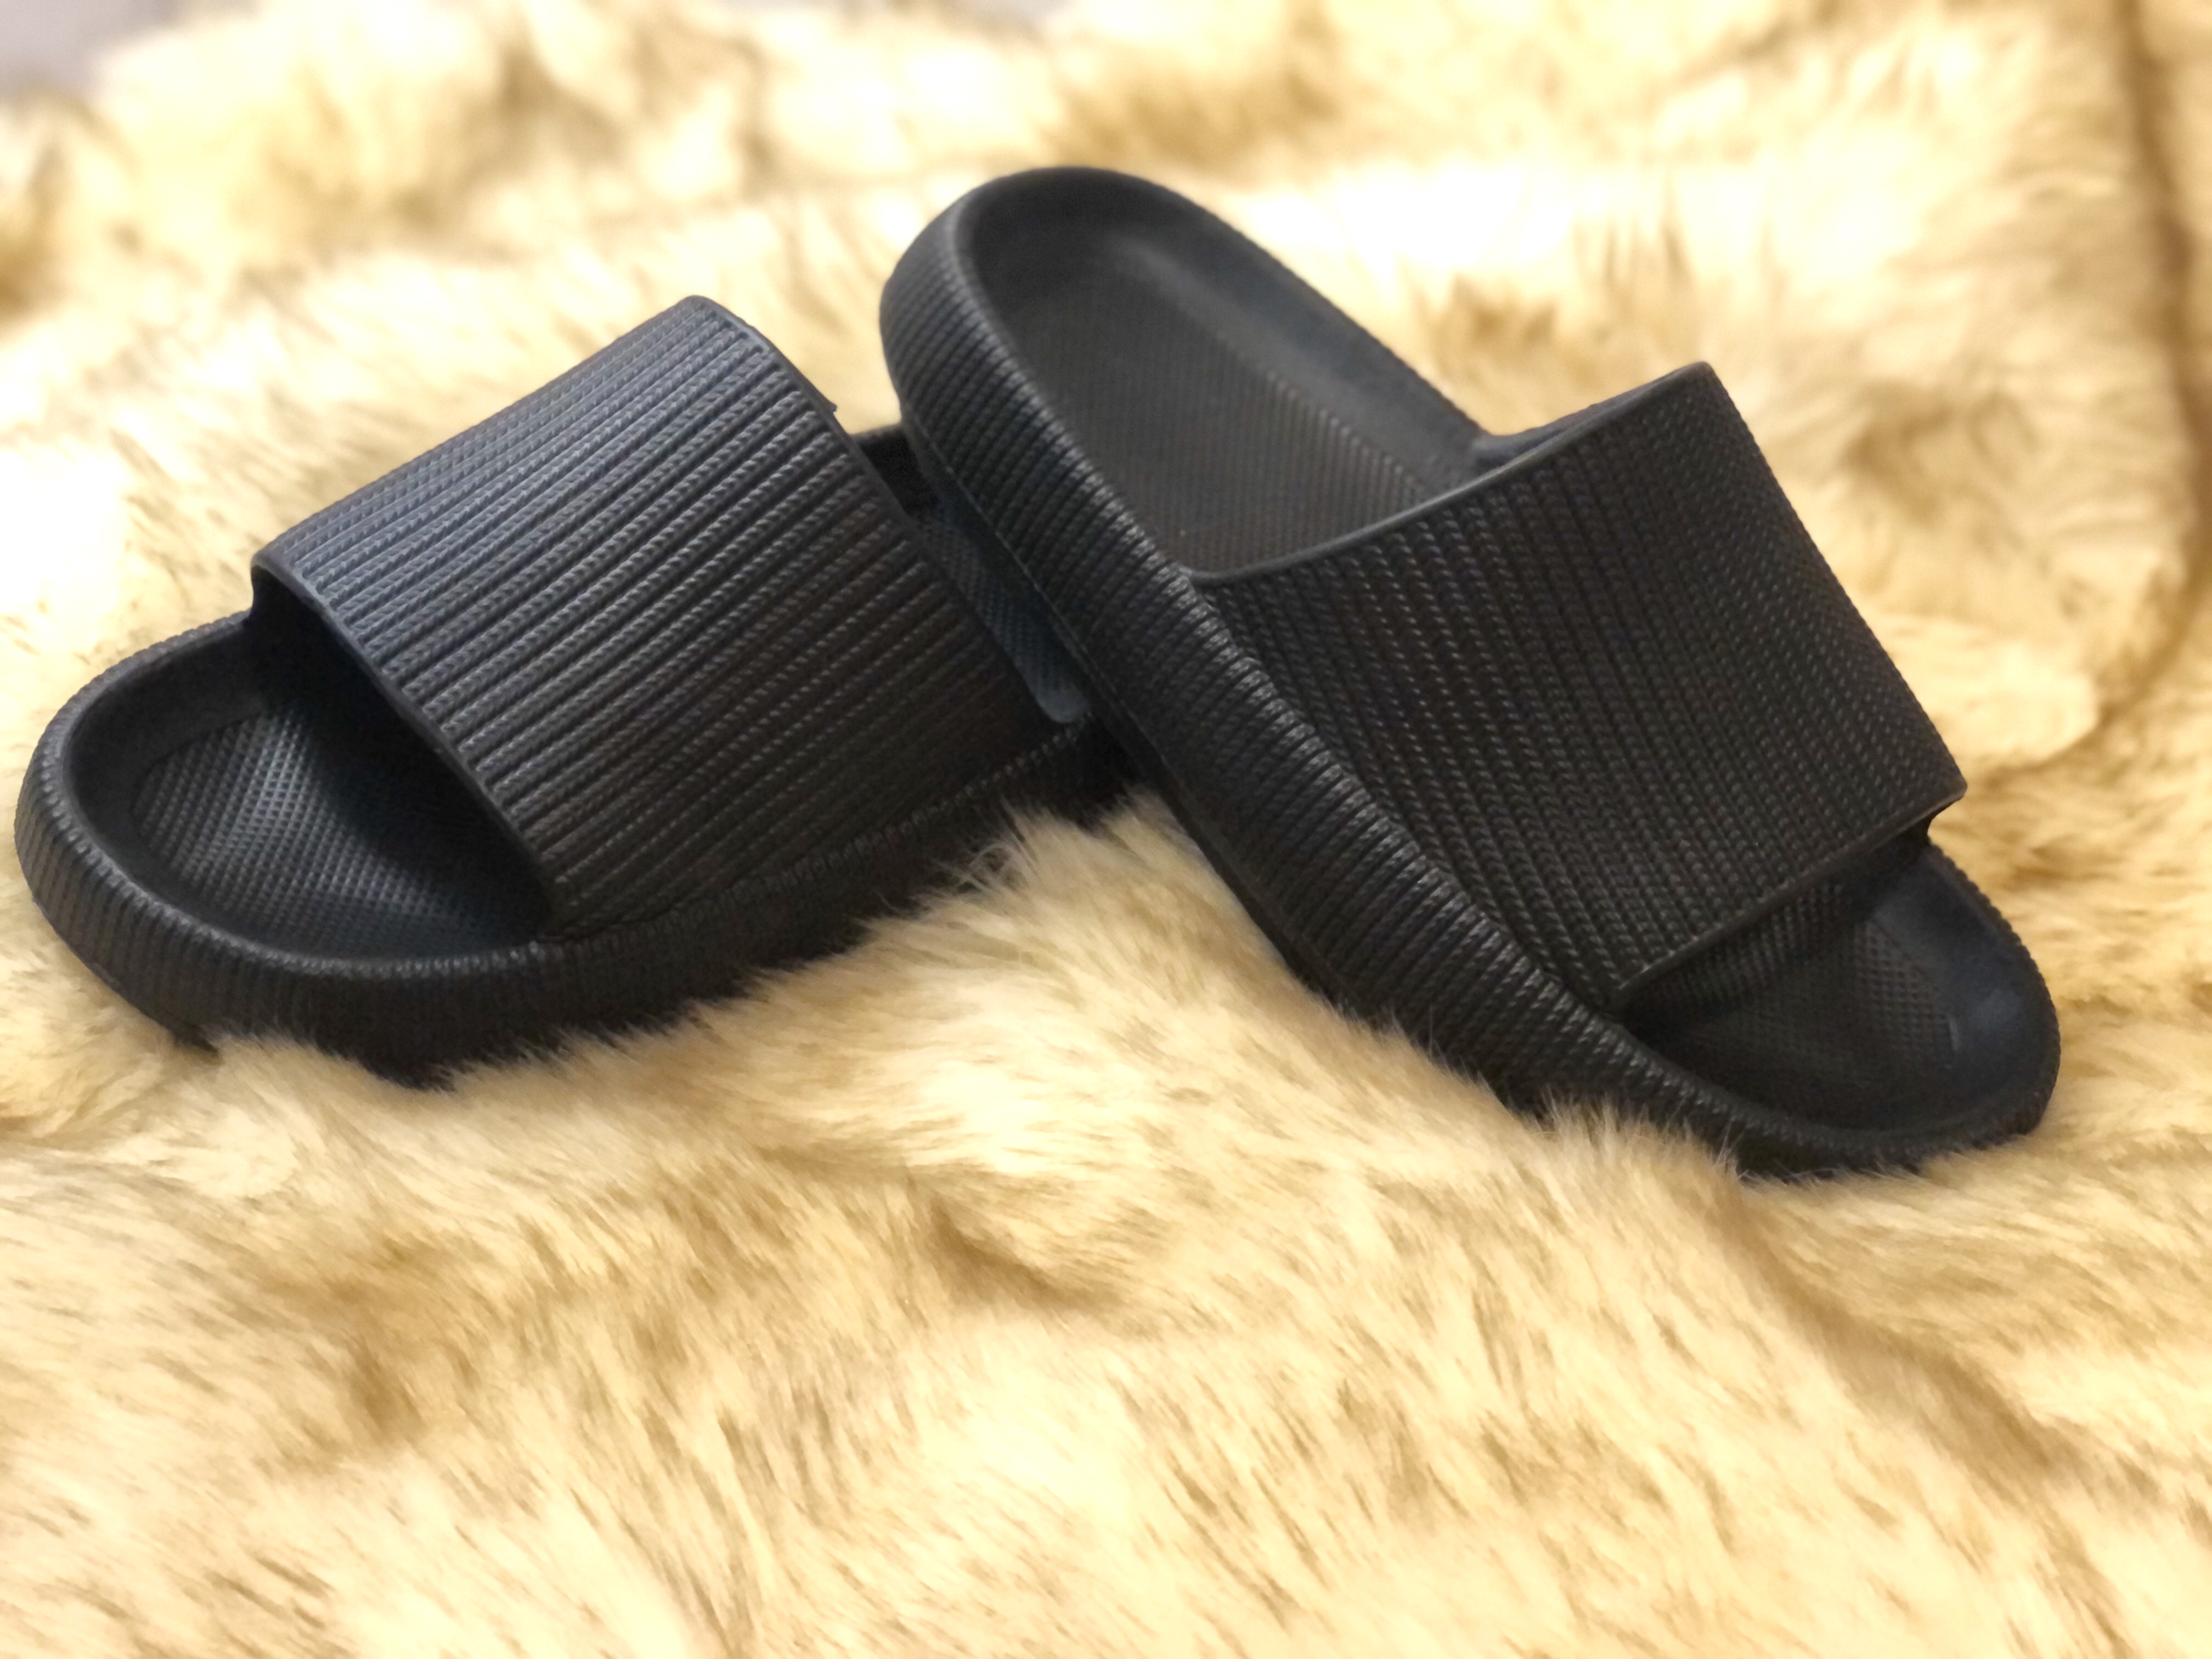 Pillow slides are the latest 'ugly' shoe trend to go viral on